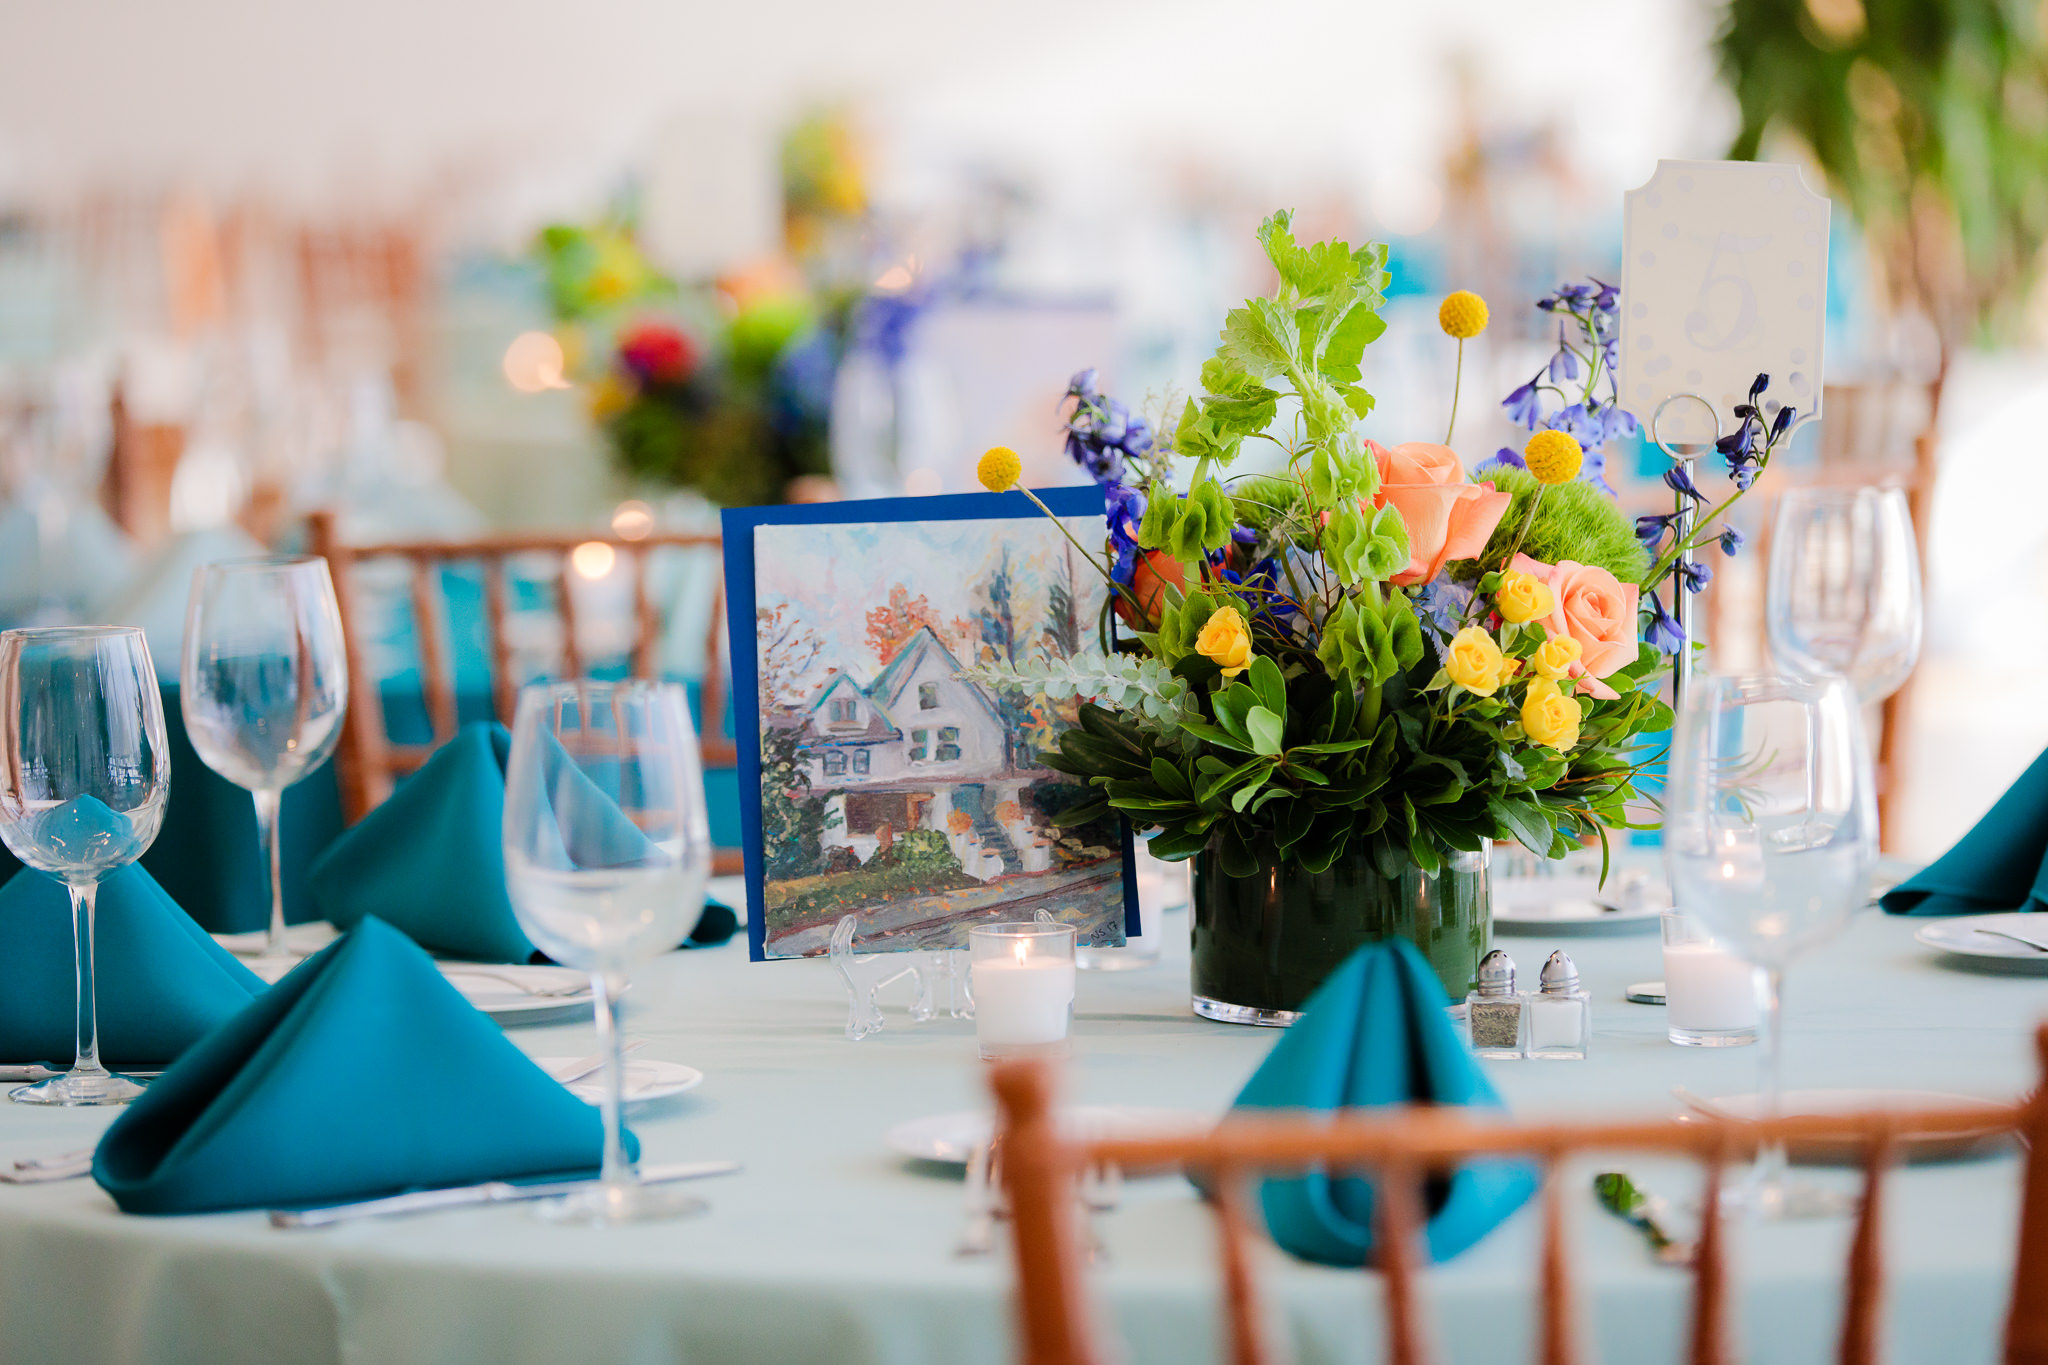 Floral centerpieces by Hepatica and a custom painting by the bride sit atop each table at a Phipps Conservatory wedding reception